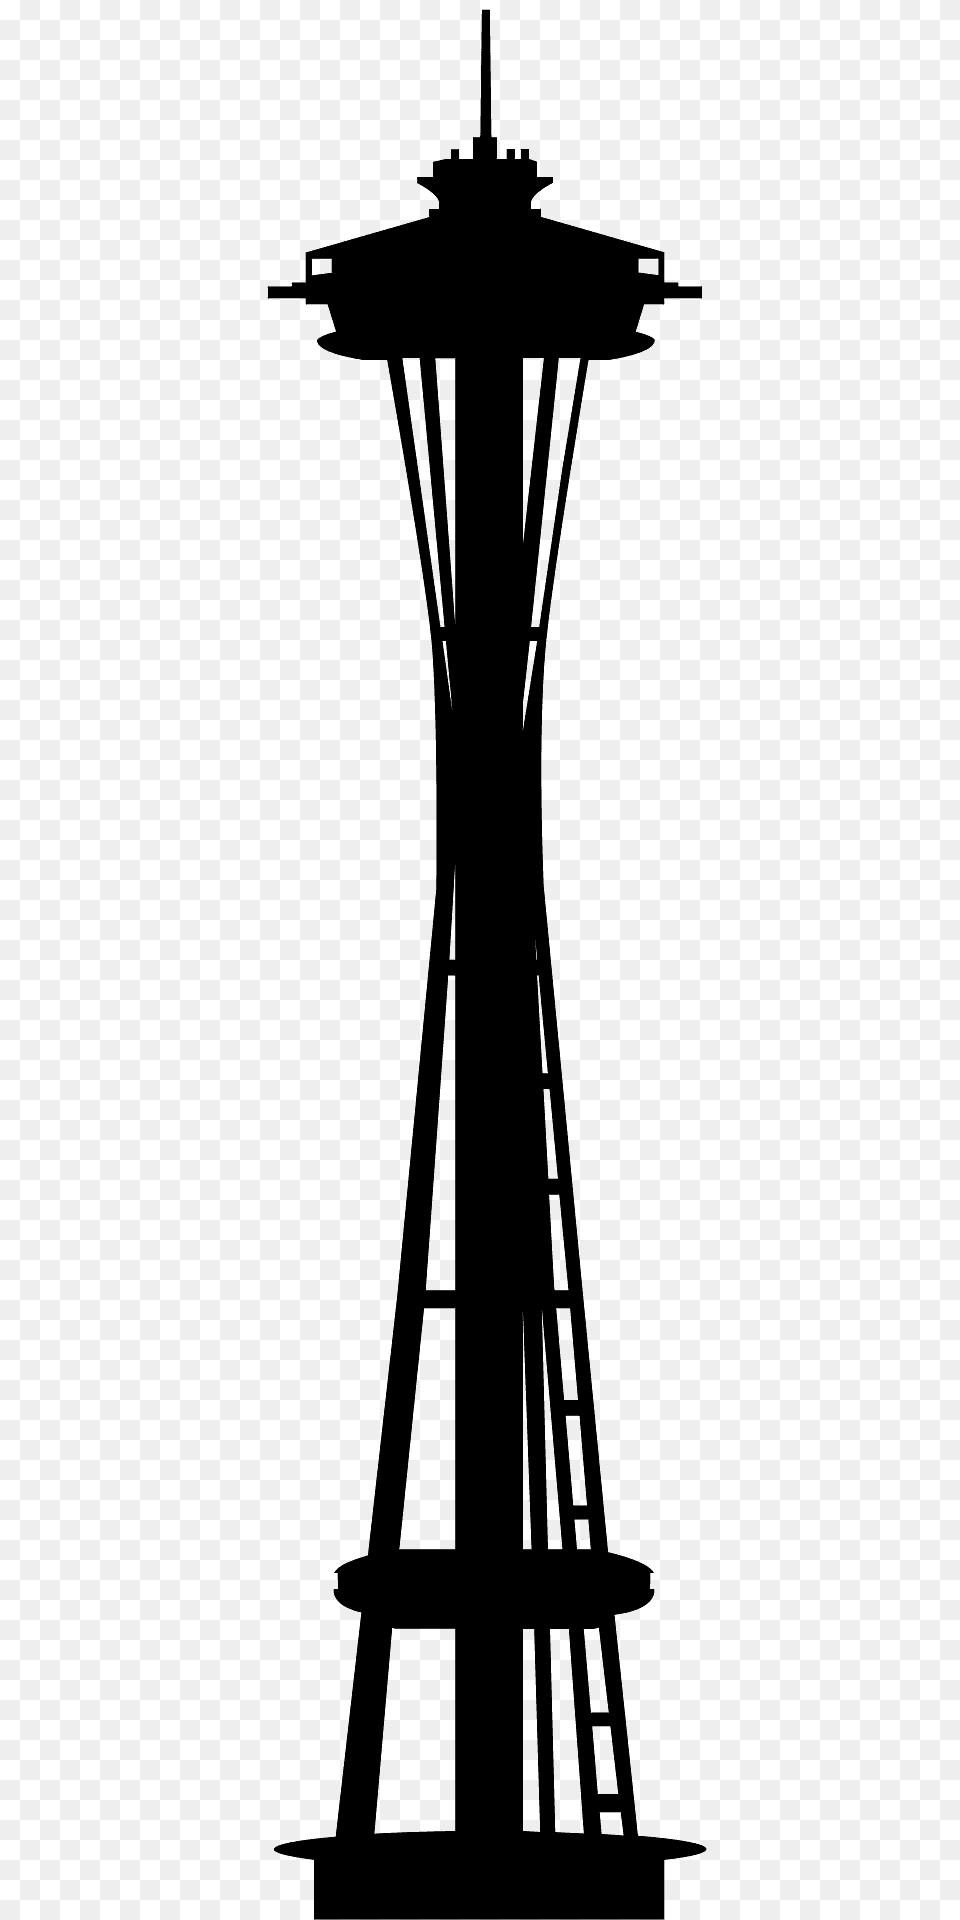 Seattle Space Needle Silhouette, Architecture, Building, Tower Png